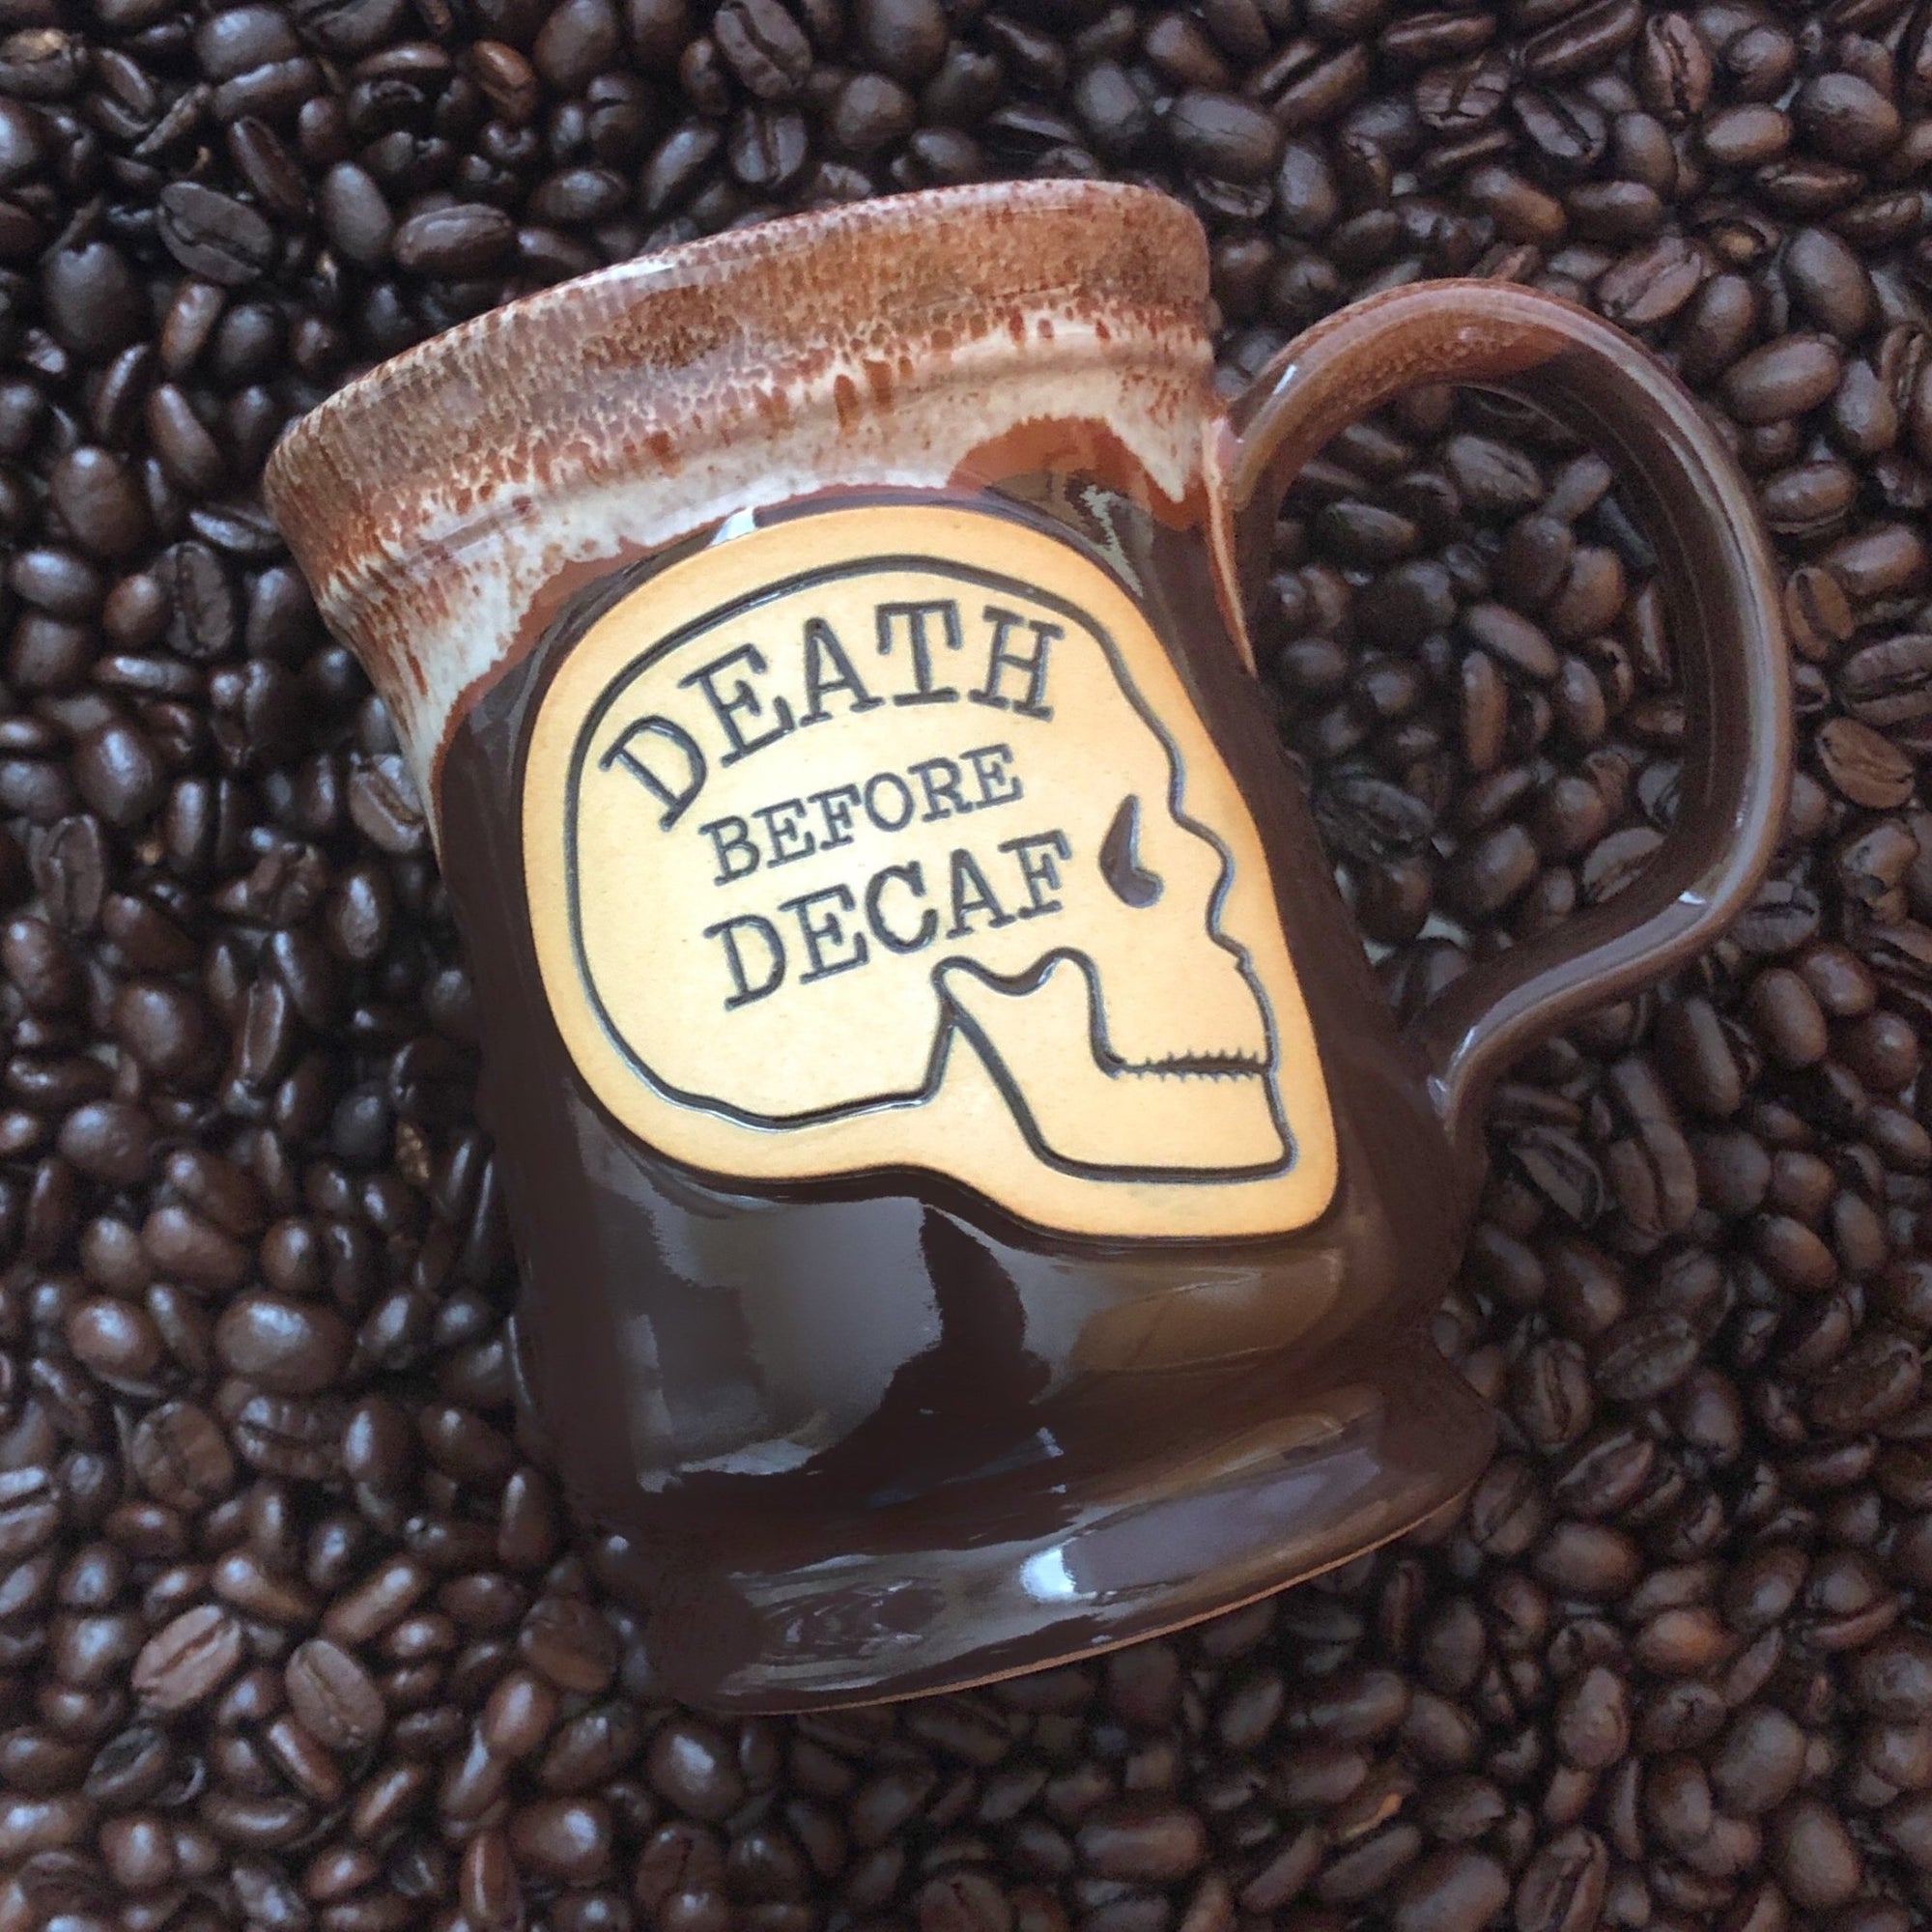 Death Before Decaf Handcrafted Pottery Mug - Rad Girl Creations